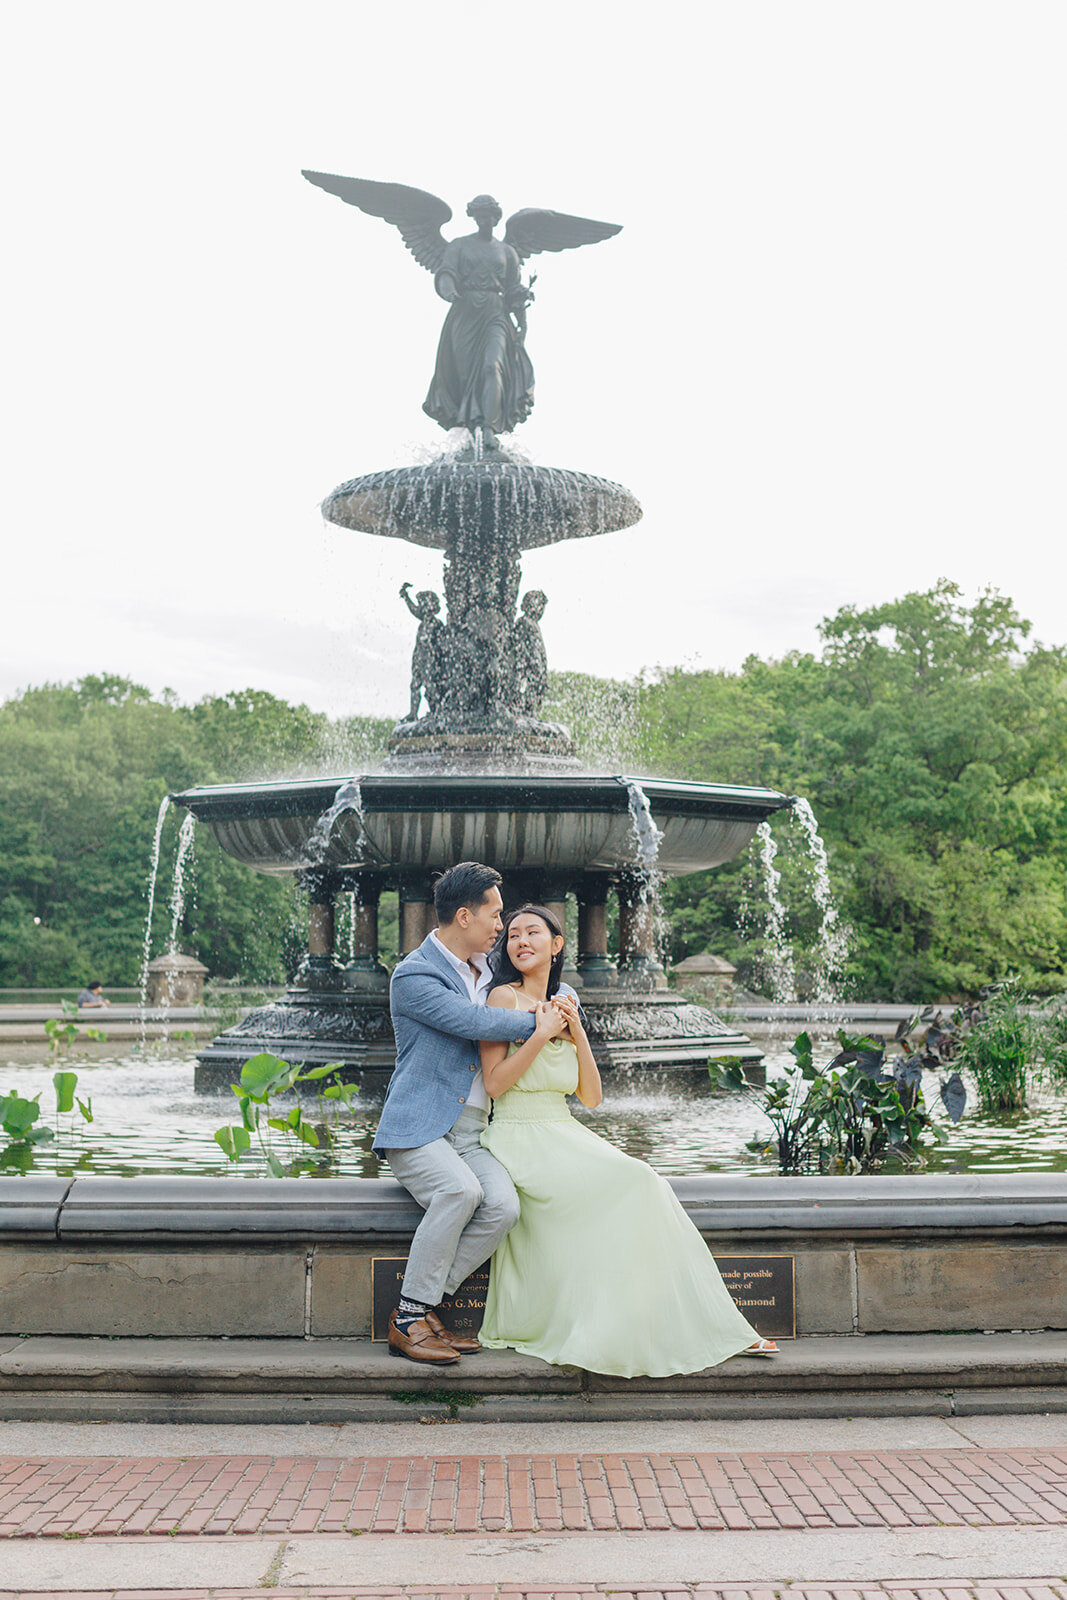 Wild_Sound_Photography_Central_Park_Engagement_Danny_LisaEY3A9789_websize